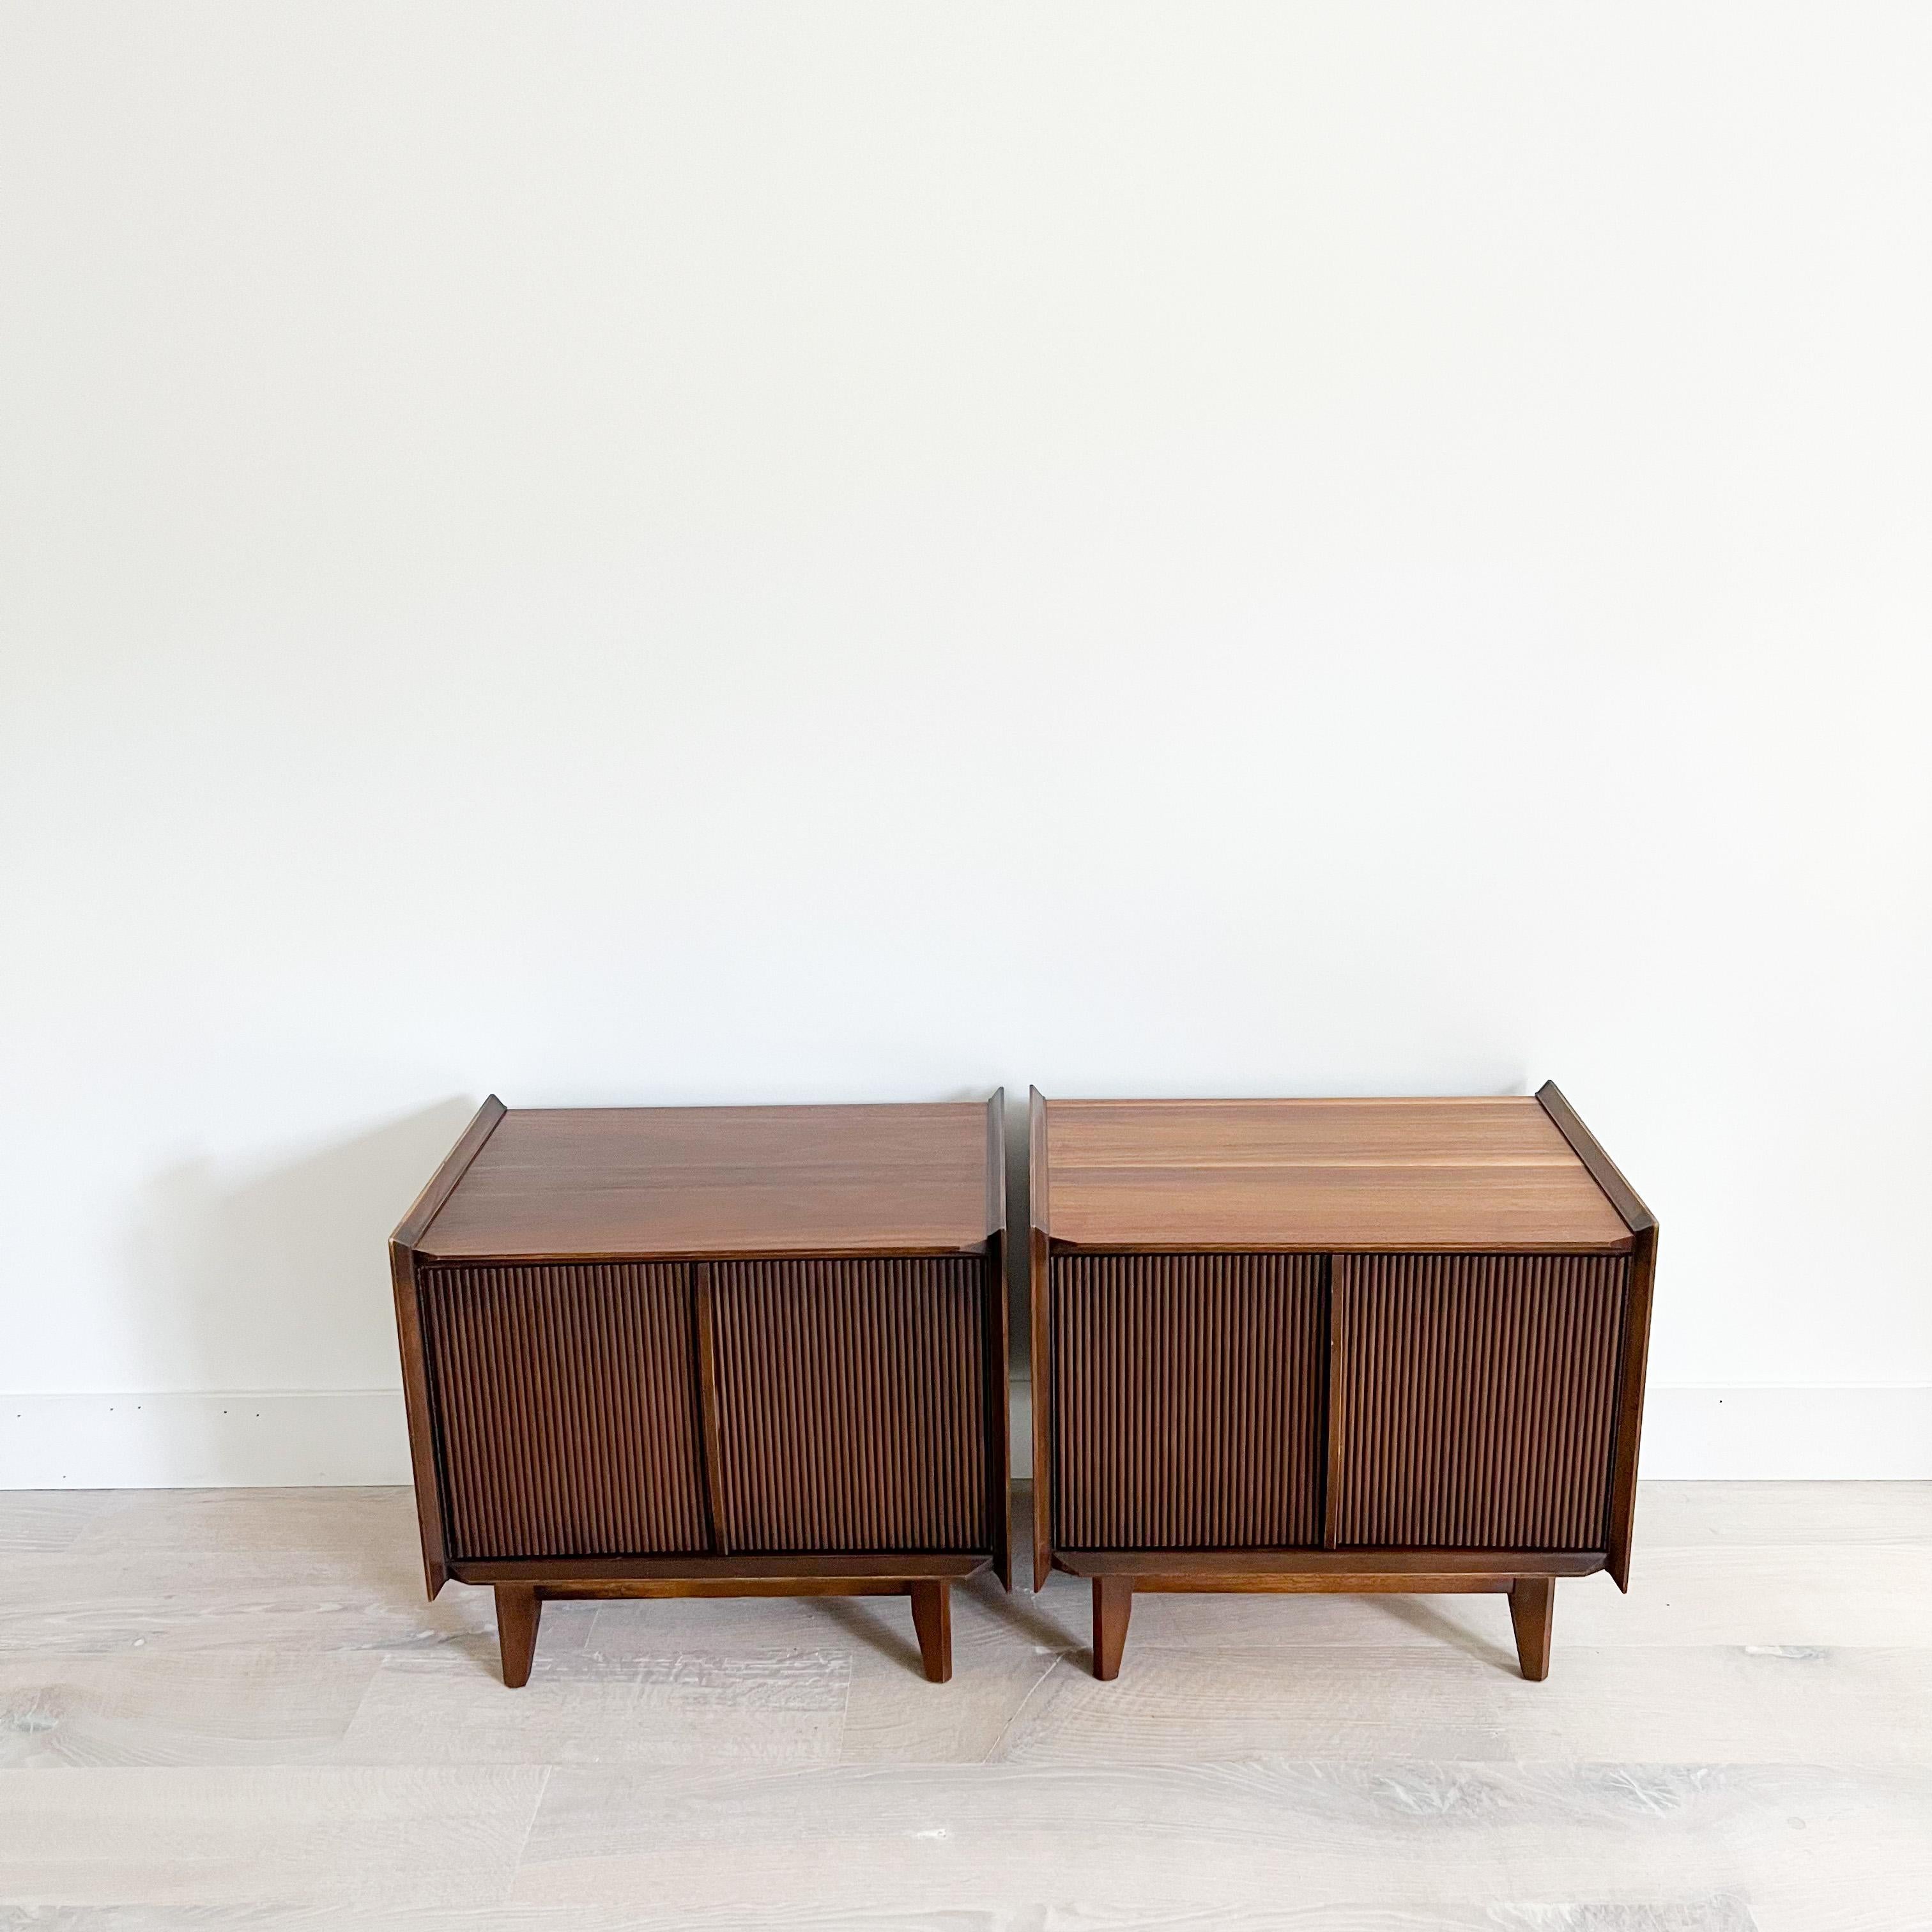 Pair of Mid-Century Modern walnut nightstands by Lane 1st Edition. The tops have been sanded and restored. Some light scuffing/scratching and small areas of veneer repair from age appropriate wear. The cabinet doors open and close with ease.